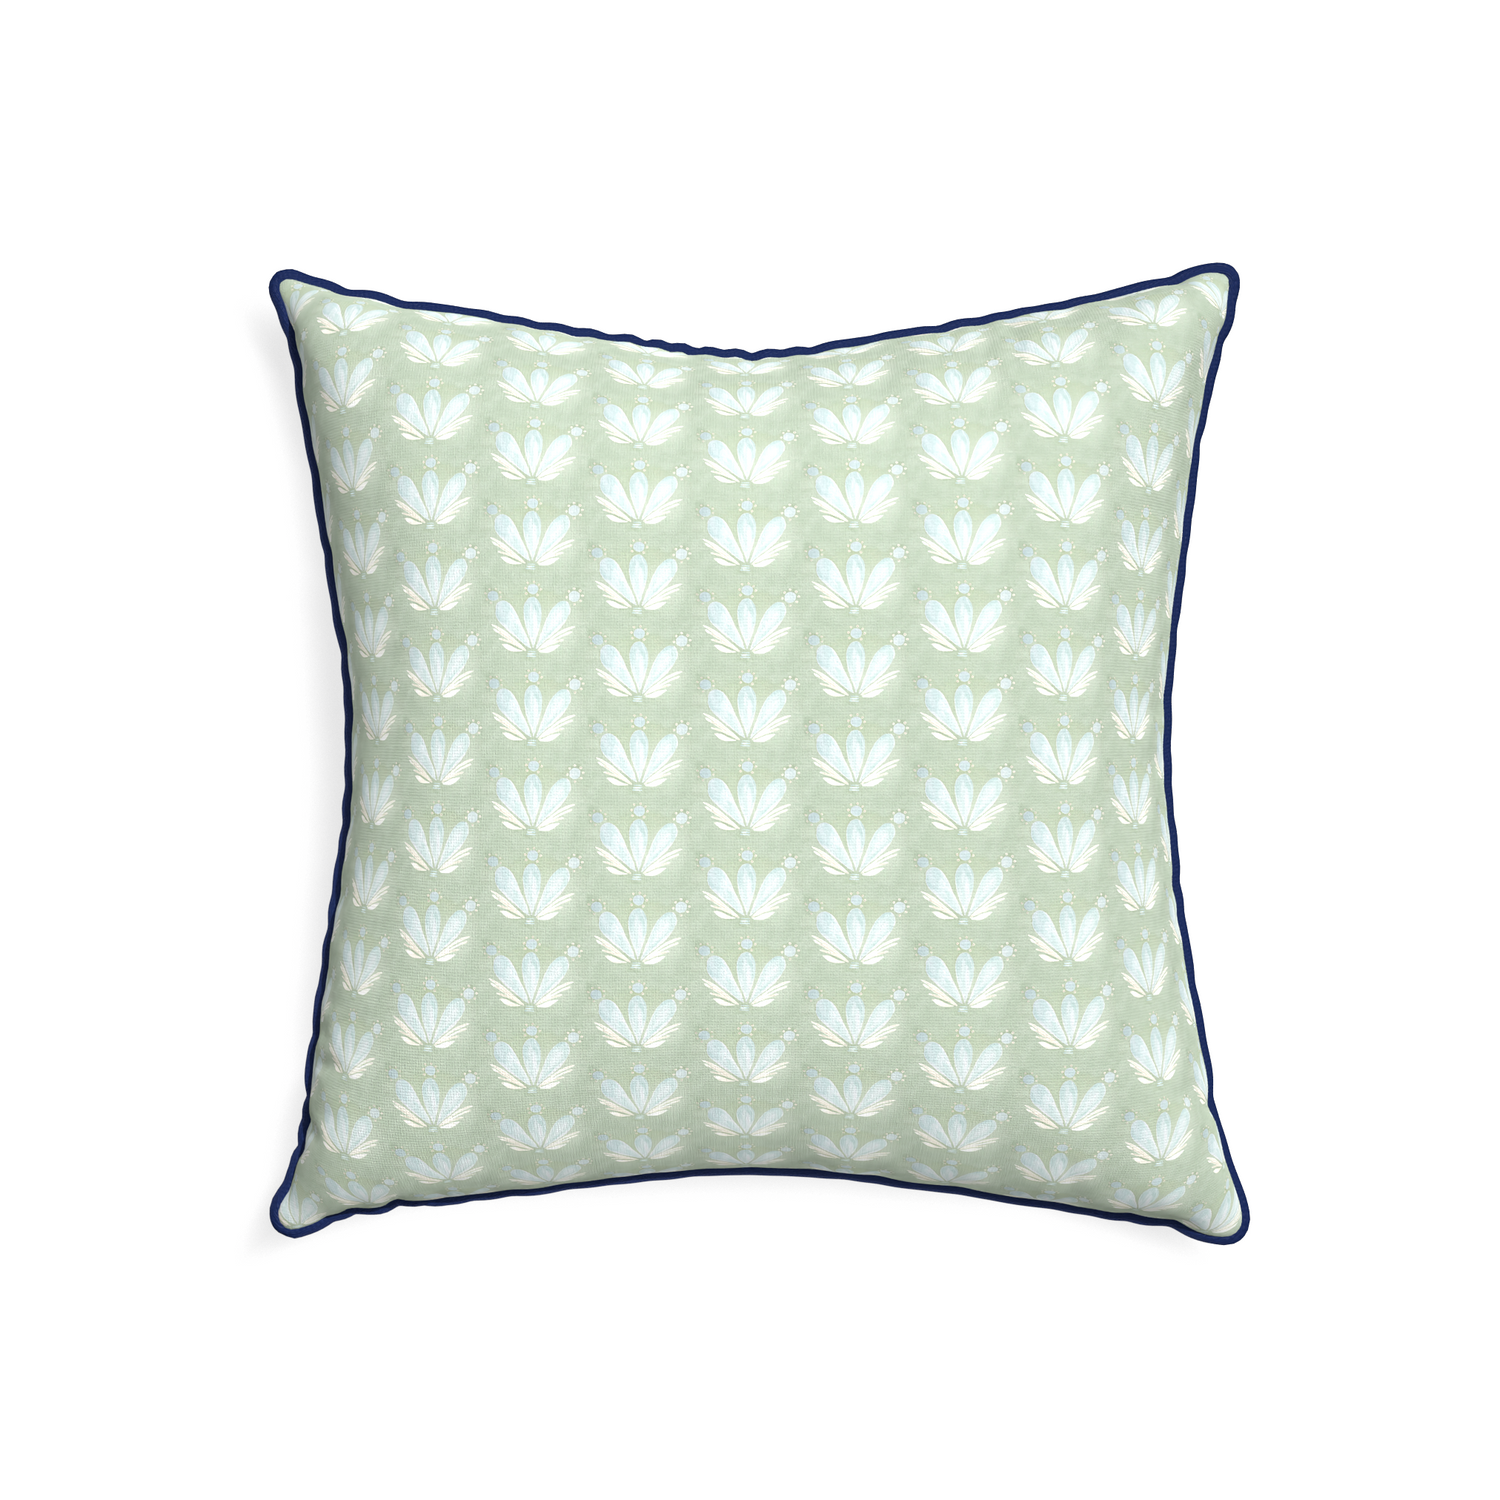 22-square serena sea salt custom blue & green floral drop repeatpillow with midnight piping on white background